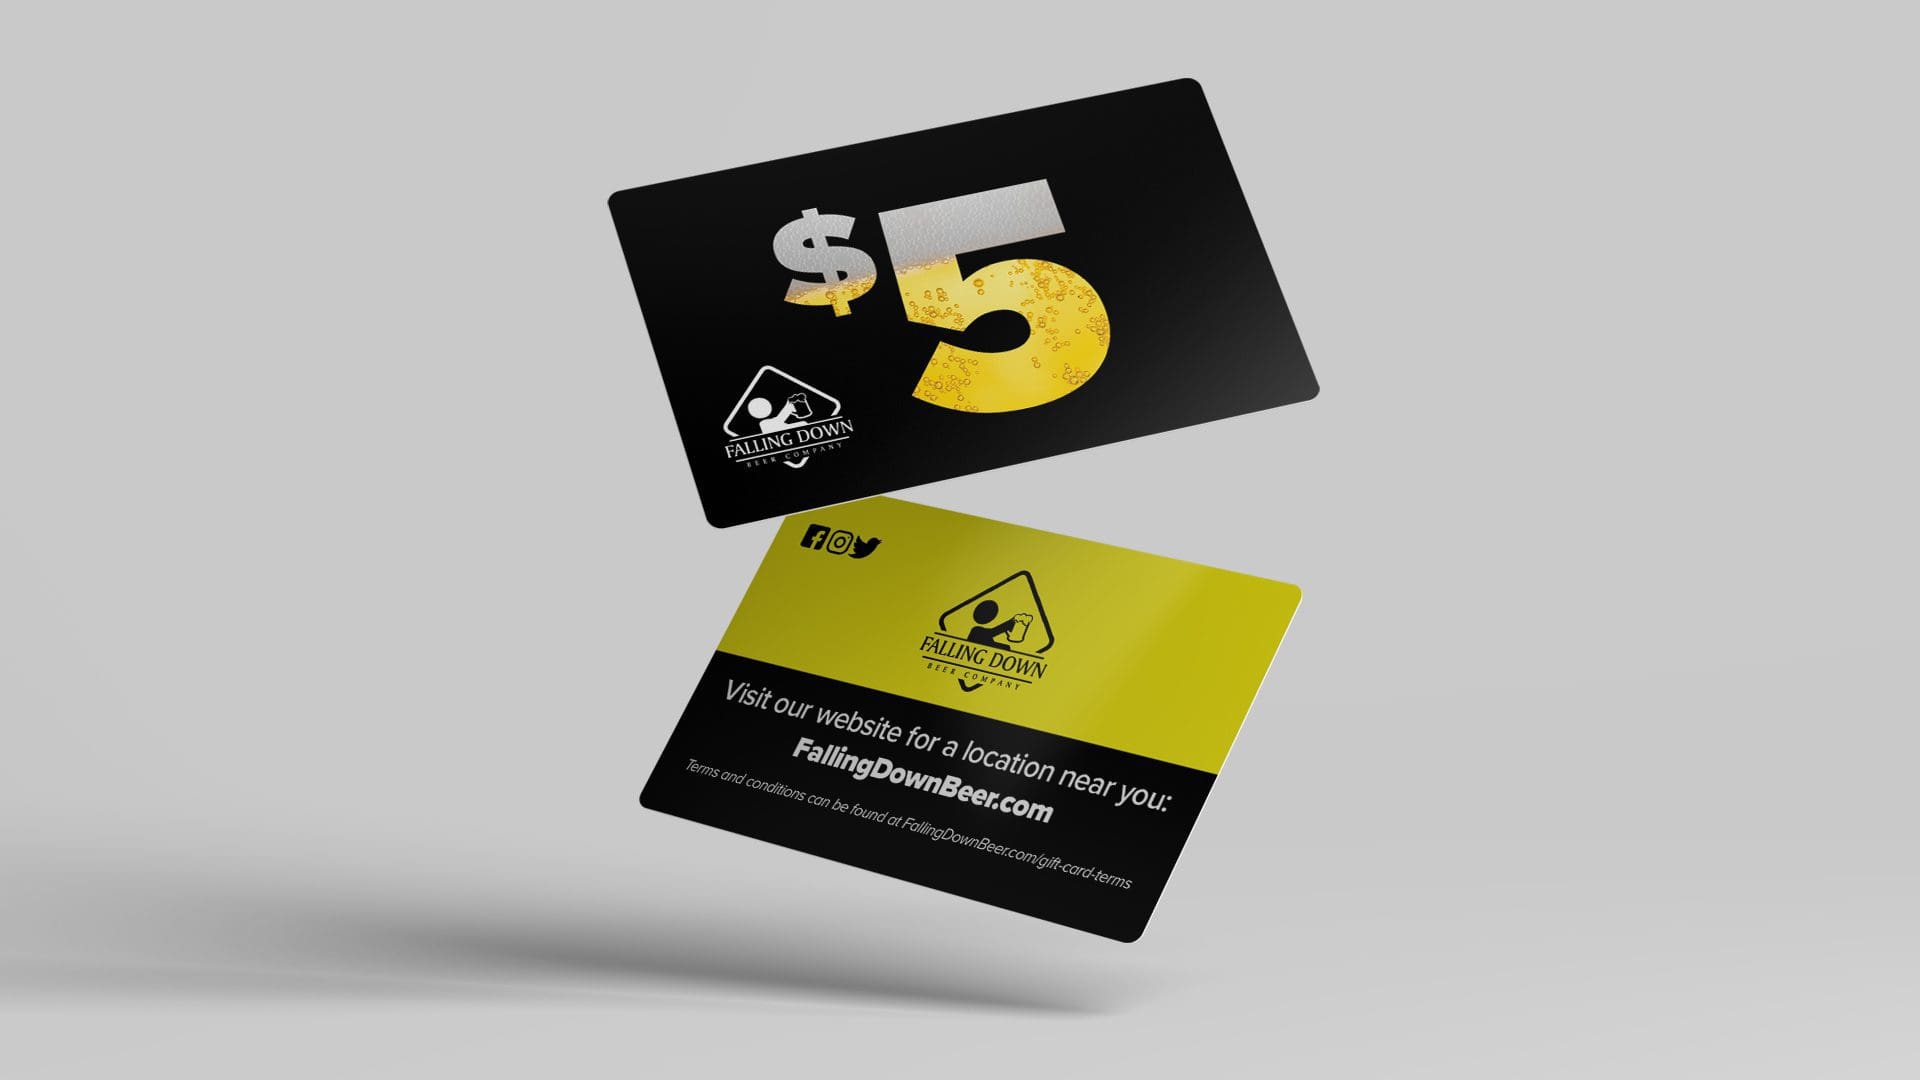 Falling Down Beer Co – Gift Cards Mockup 01